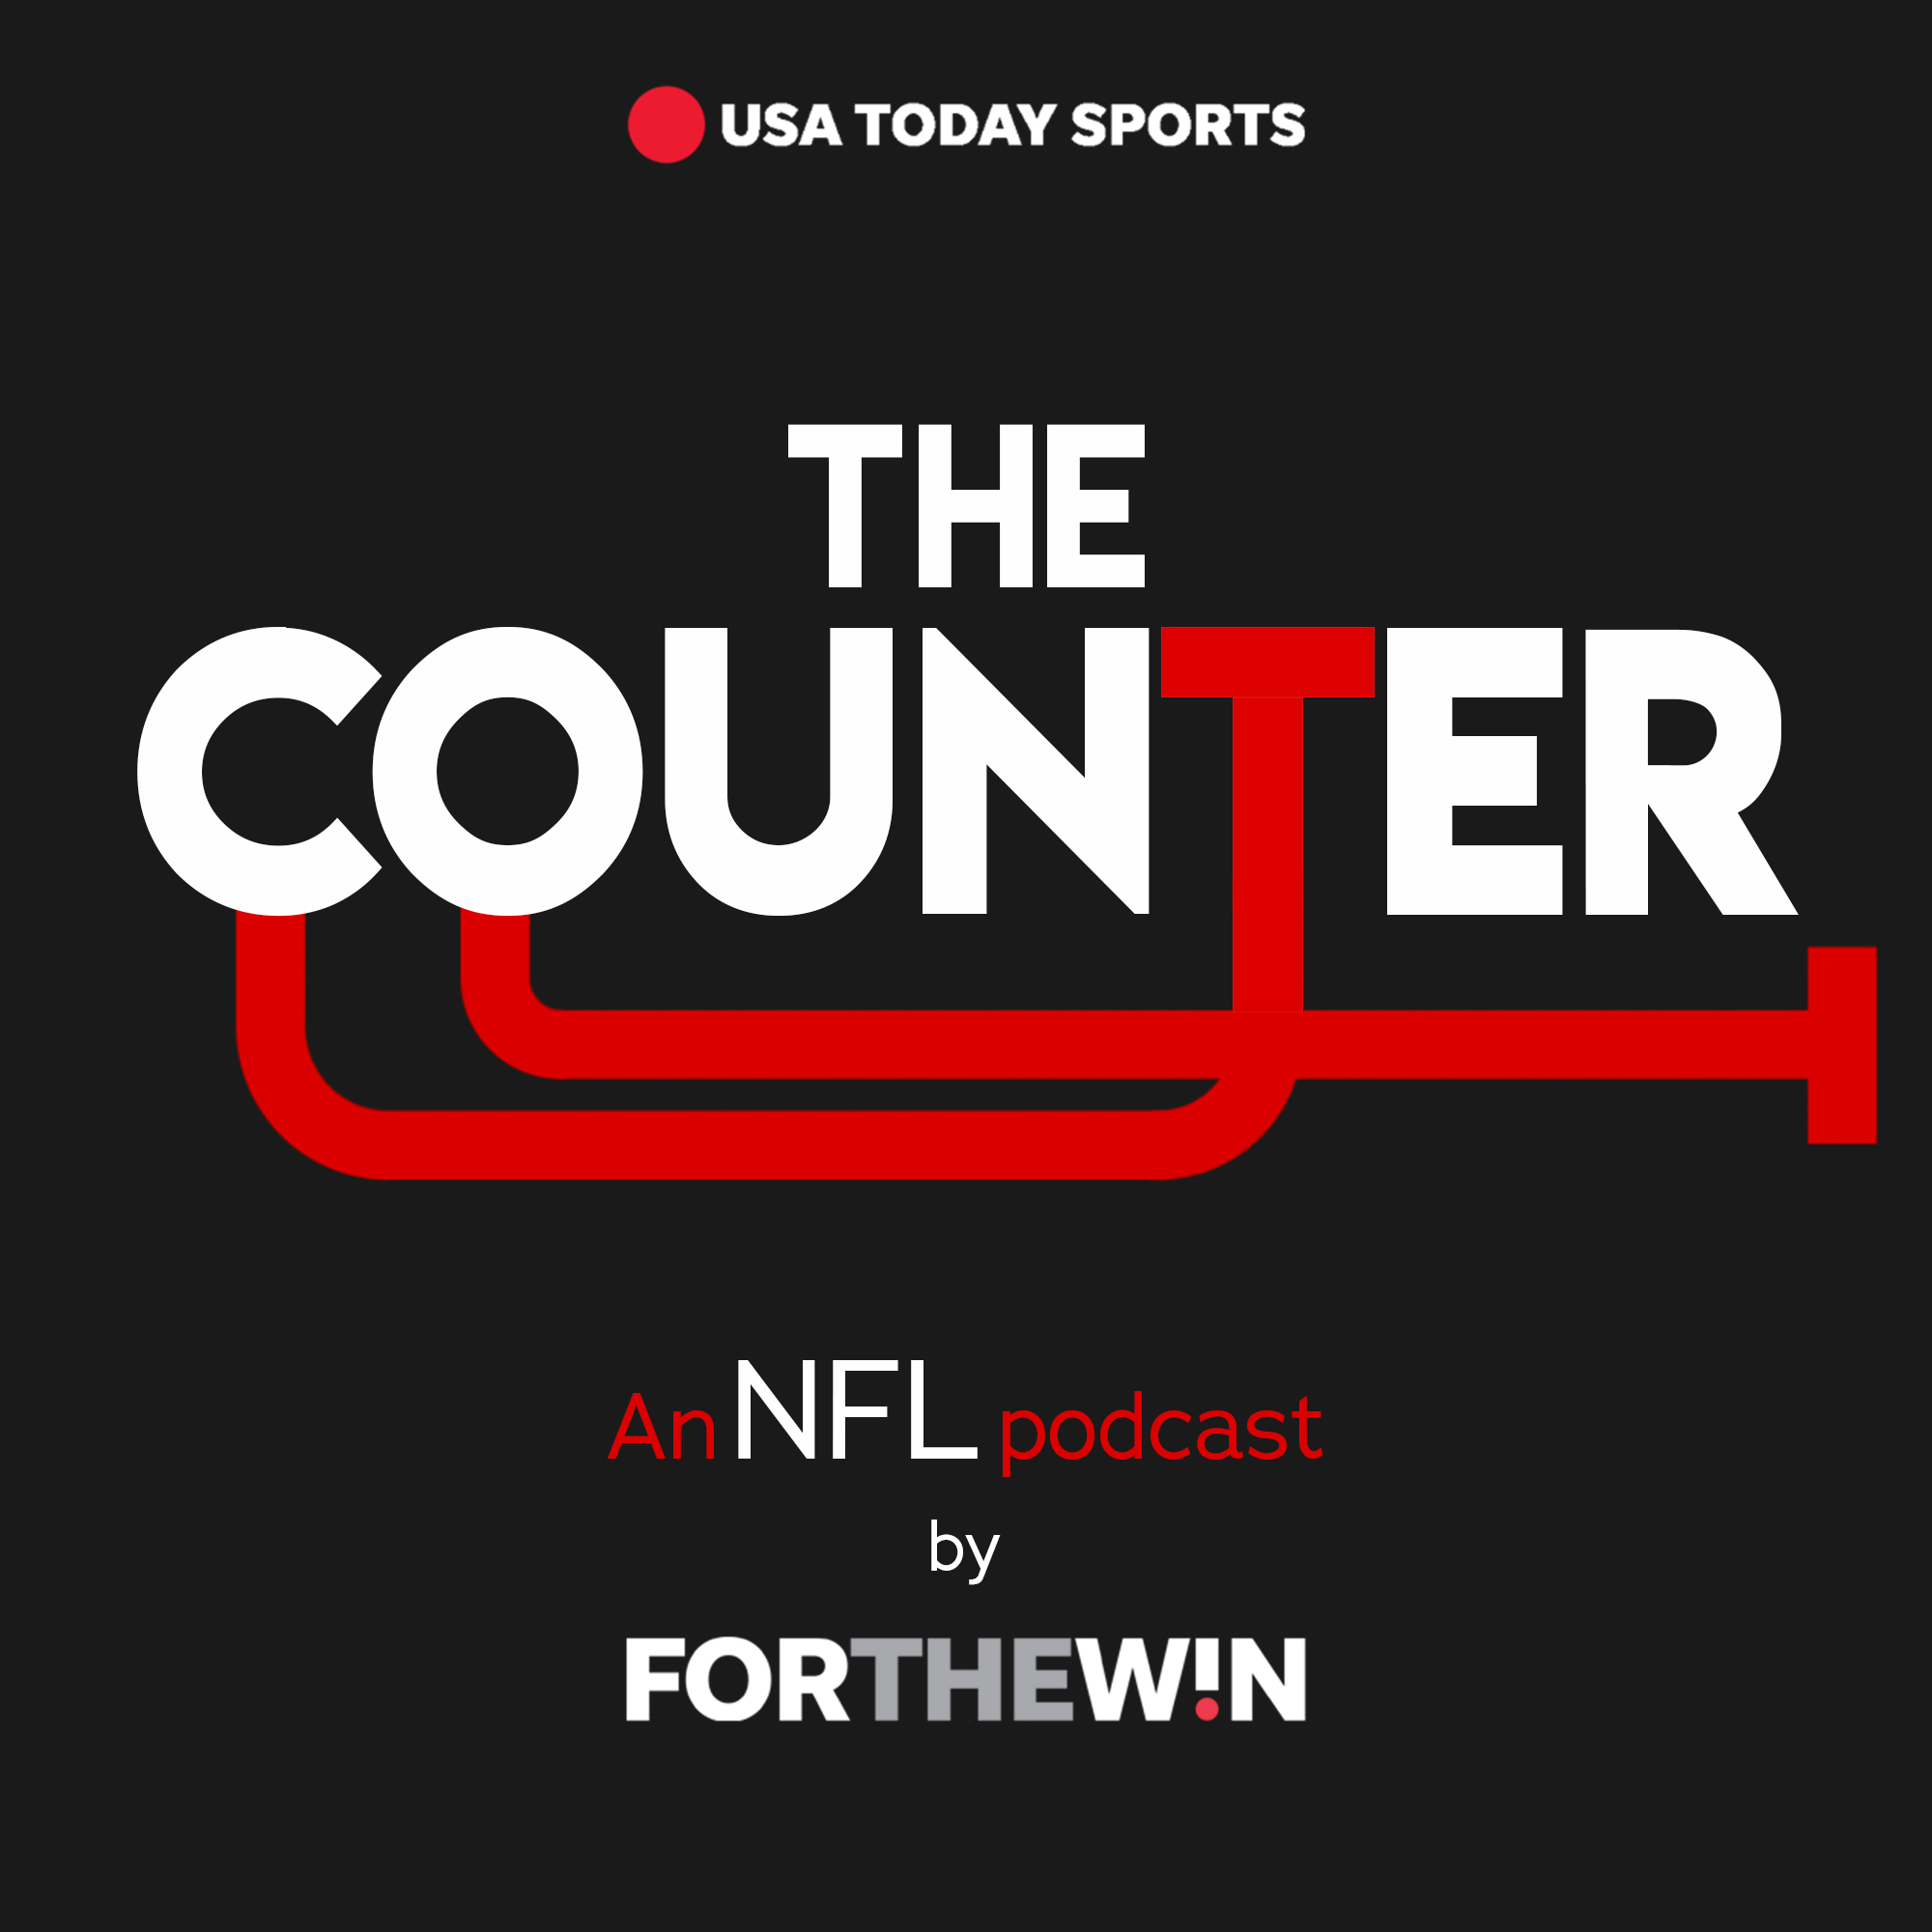 The Counter: An NFL Podcast by For The Win - Championship Sunday is here, Plus - Coaching moves